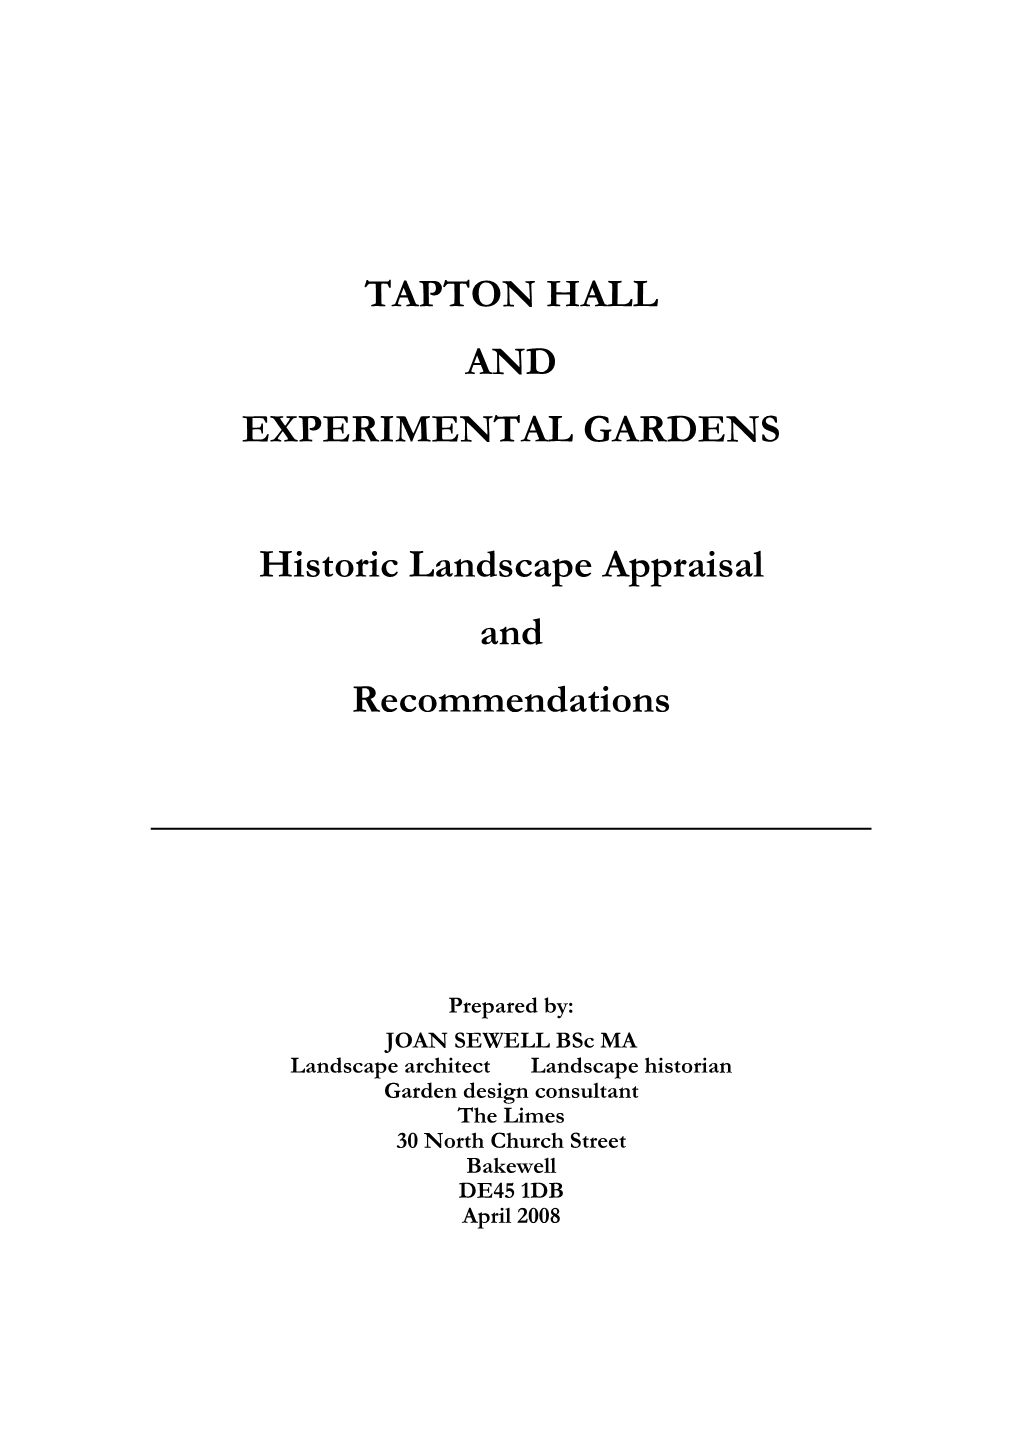 TAPTON HALL and EXPERIMENTAL GARDENS Historic Landscape